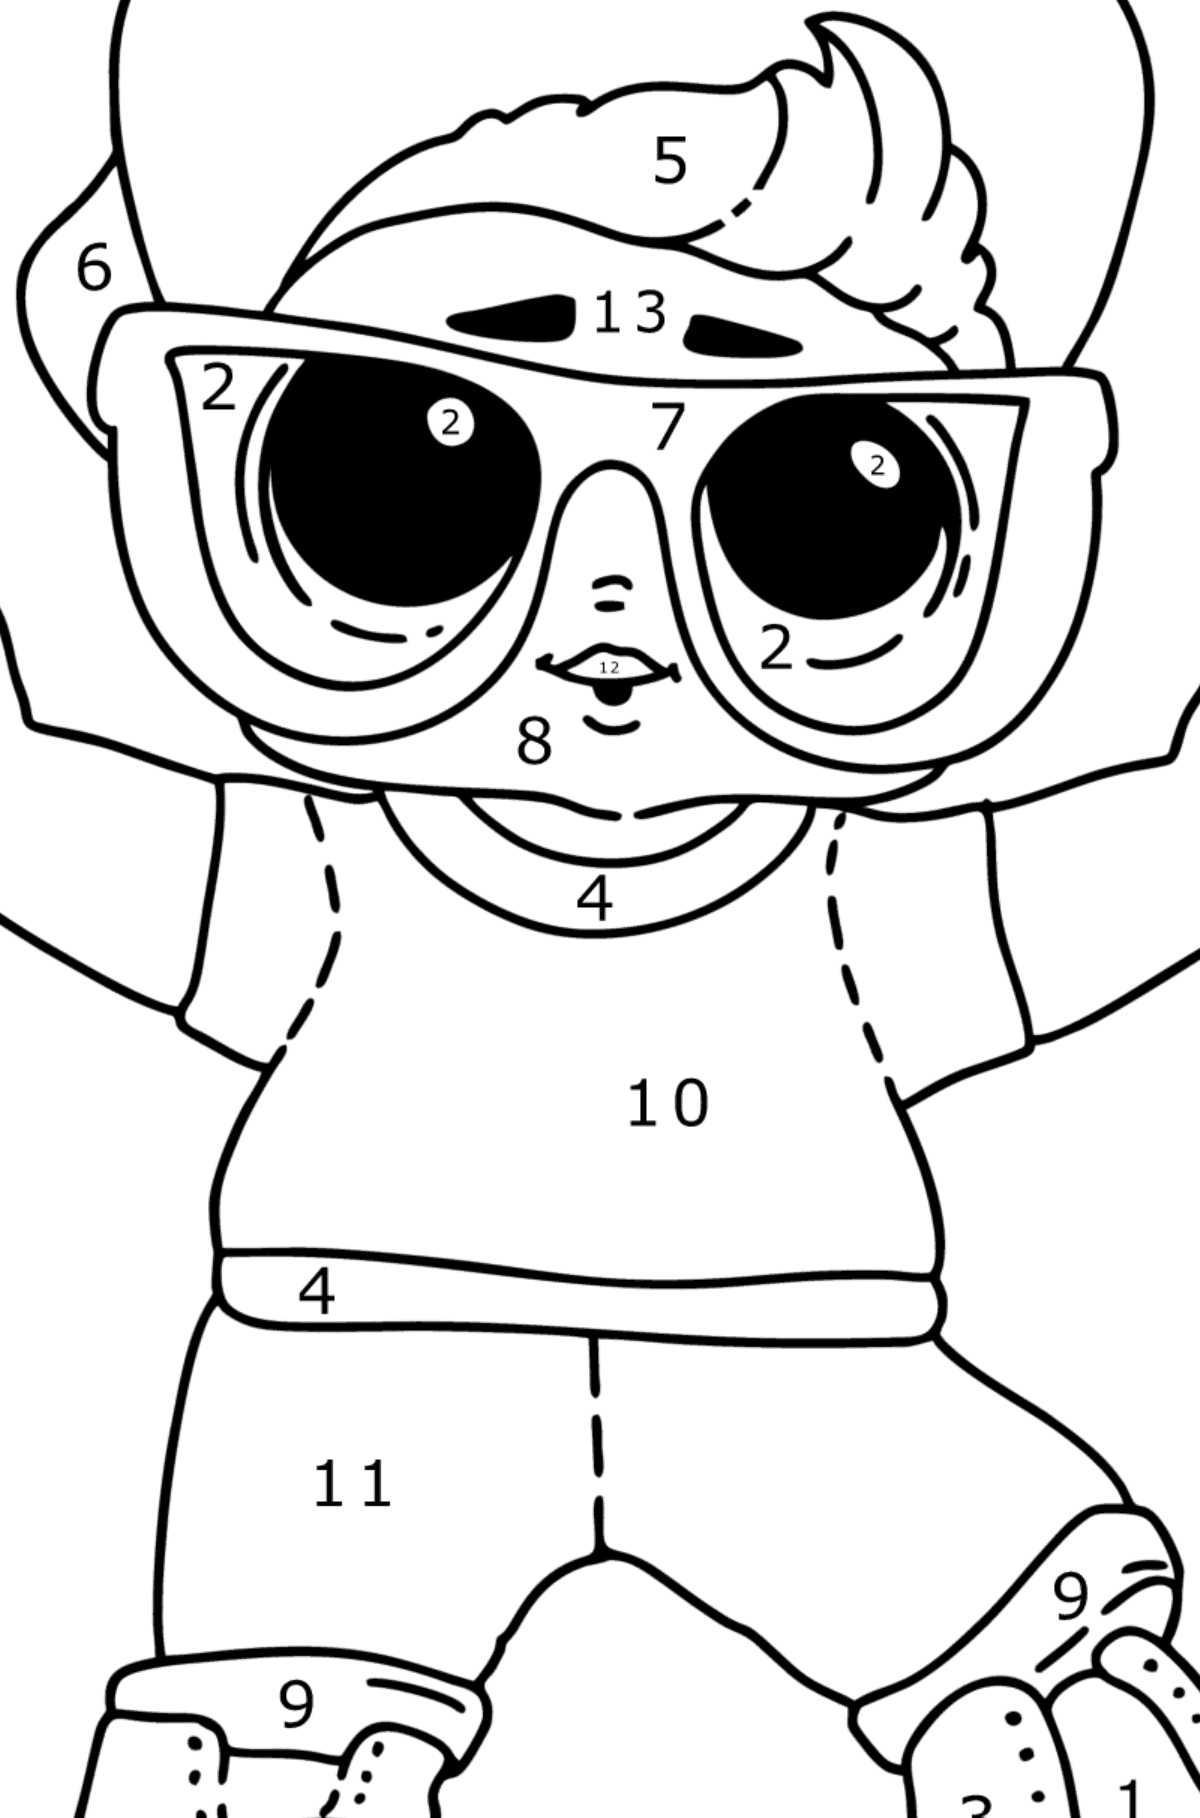 Coloring page LOL boy Next Door - Coloring by Numbers for Kids